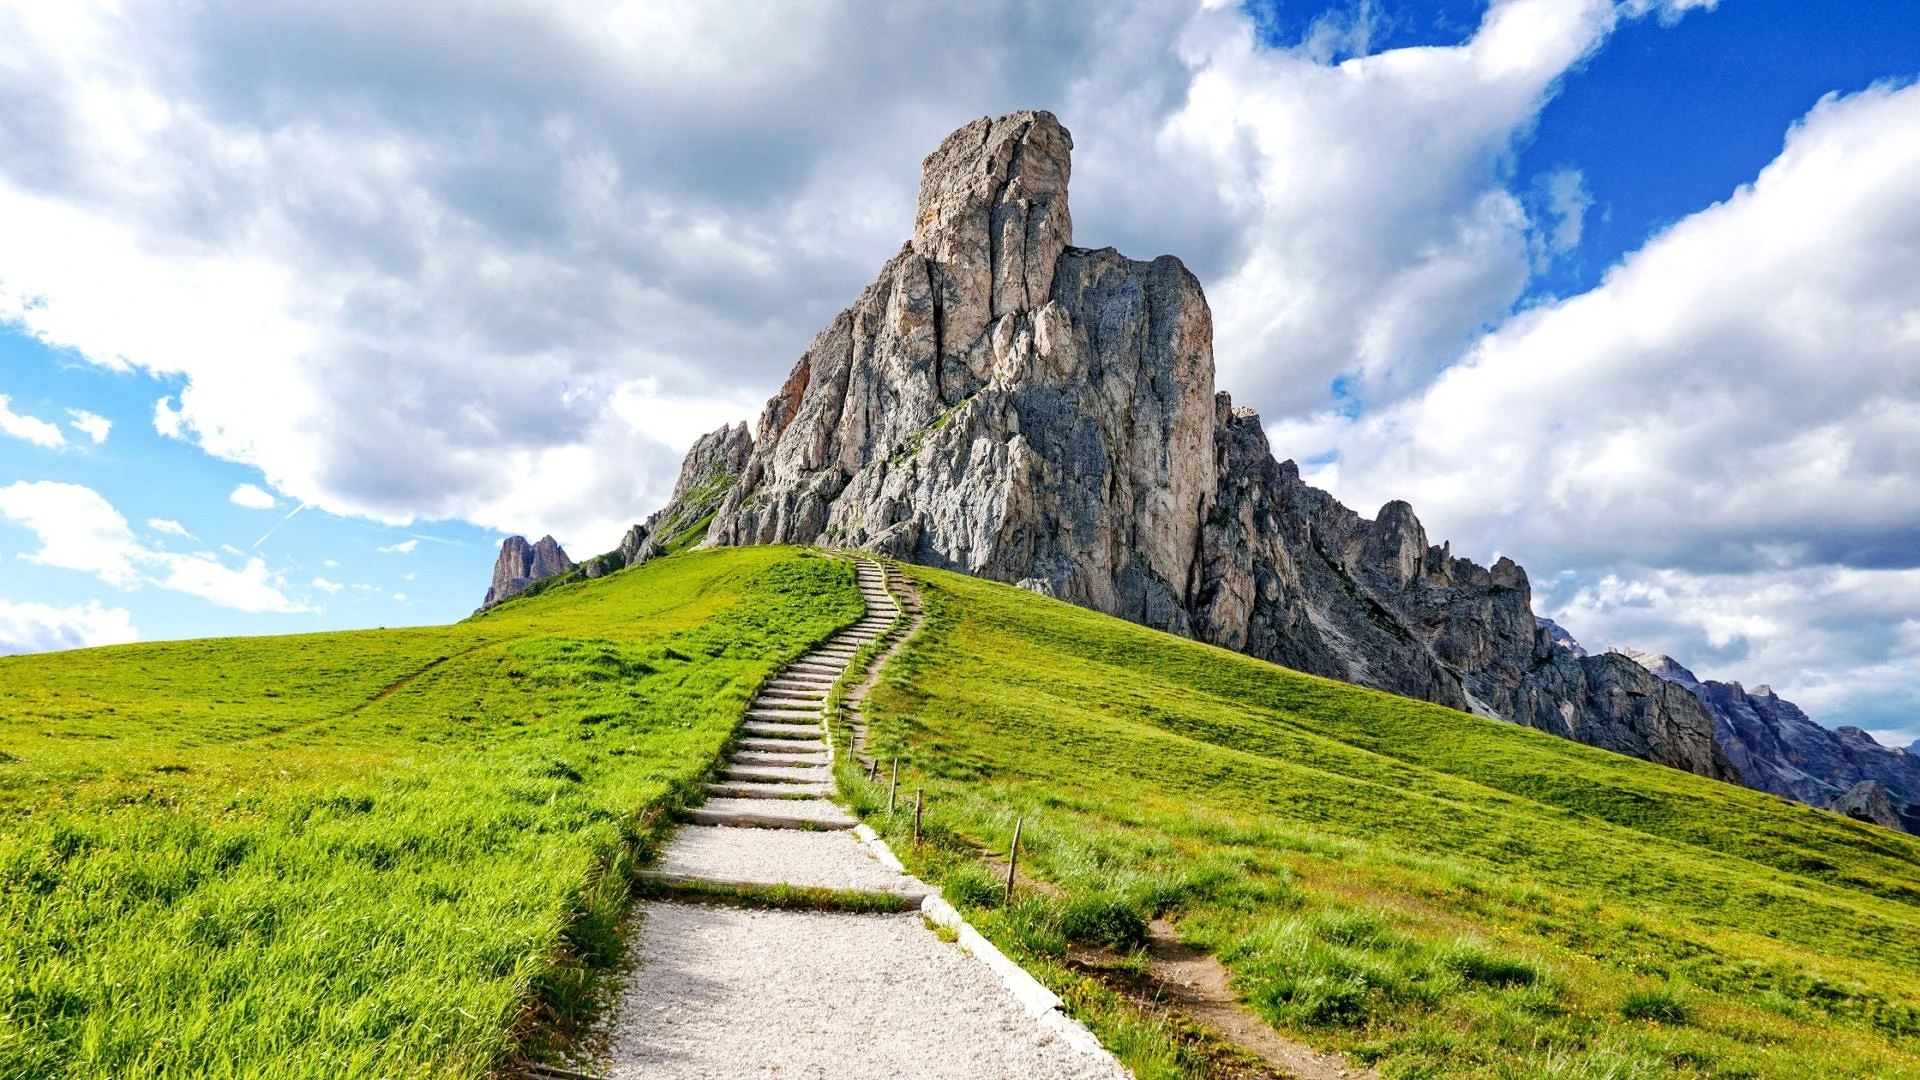 stairway-to-an-amazing-mountain-green-fields-and-gravel-path-with-stairs-leading-to-the-mountain_t20_lop6n8